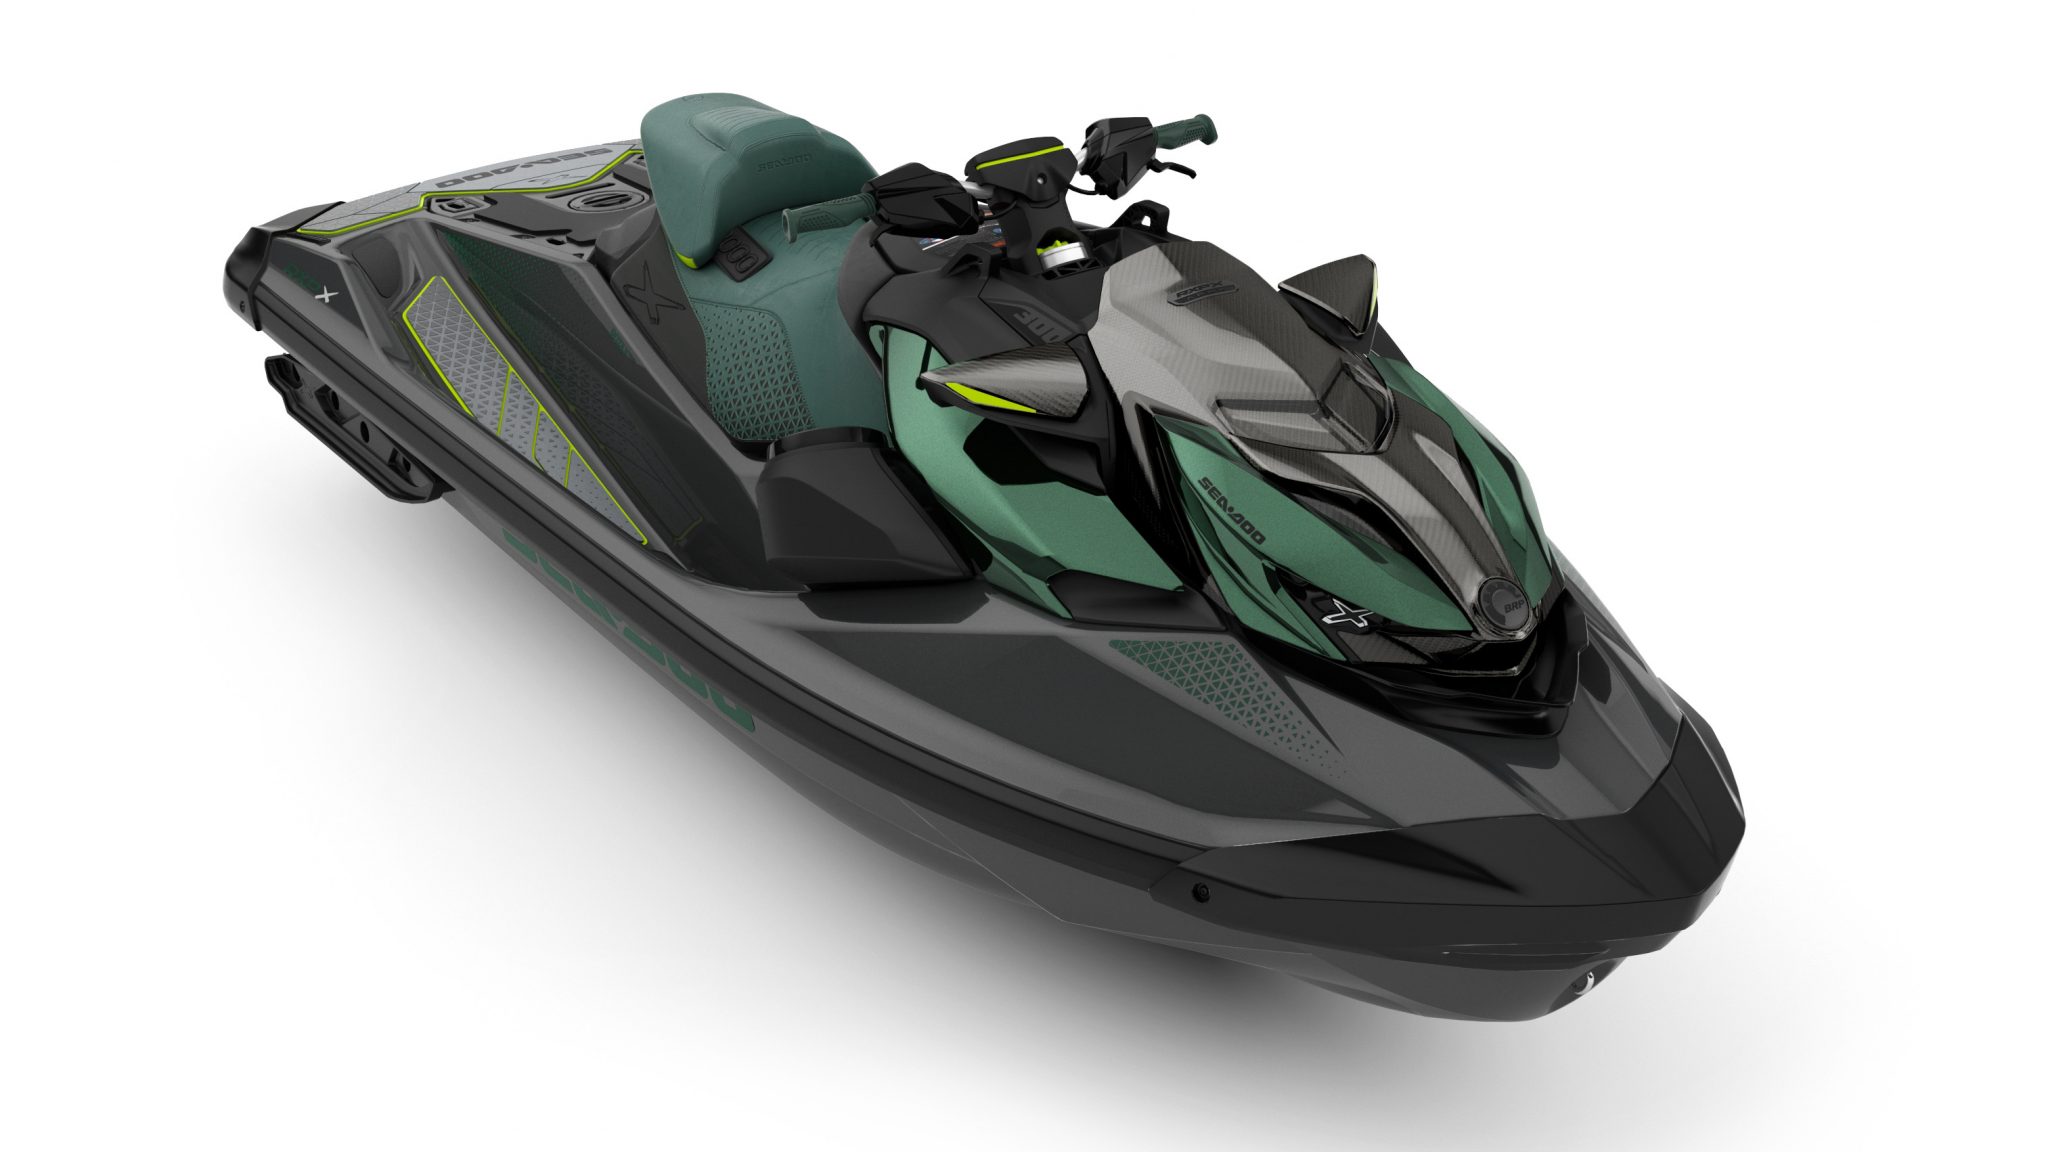 2023 SeaDoo prices and model changes